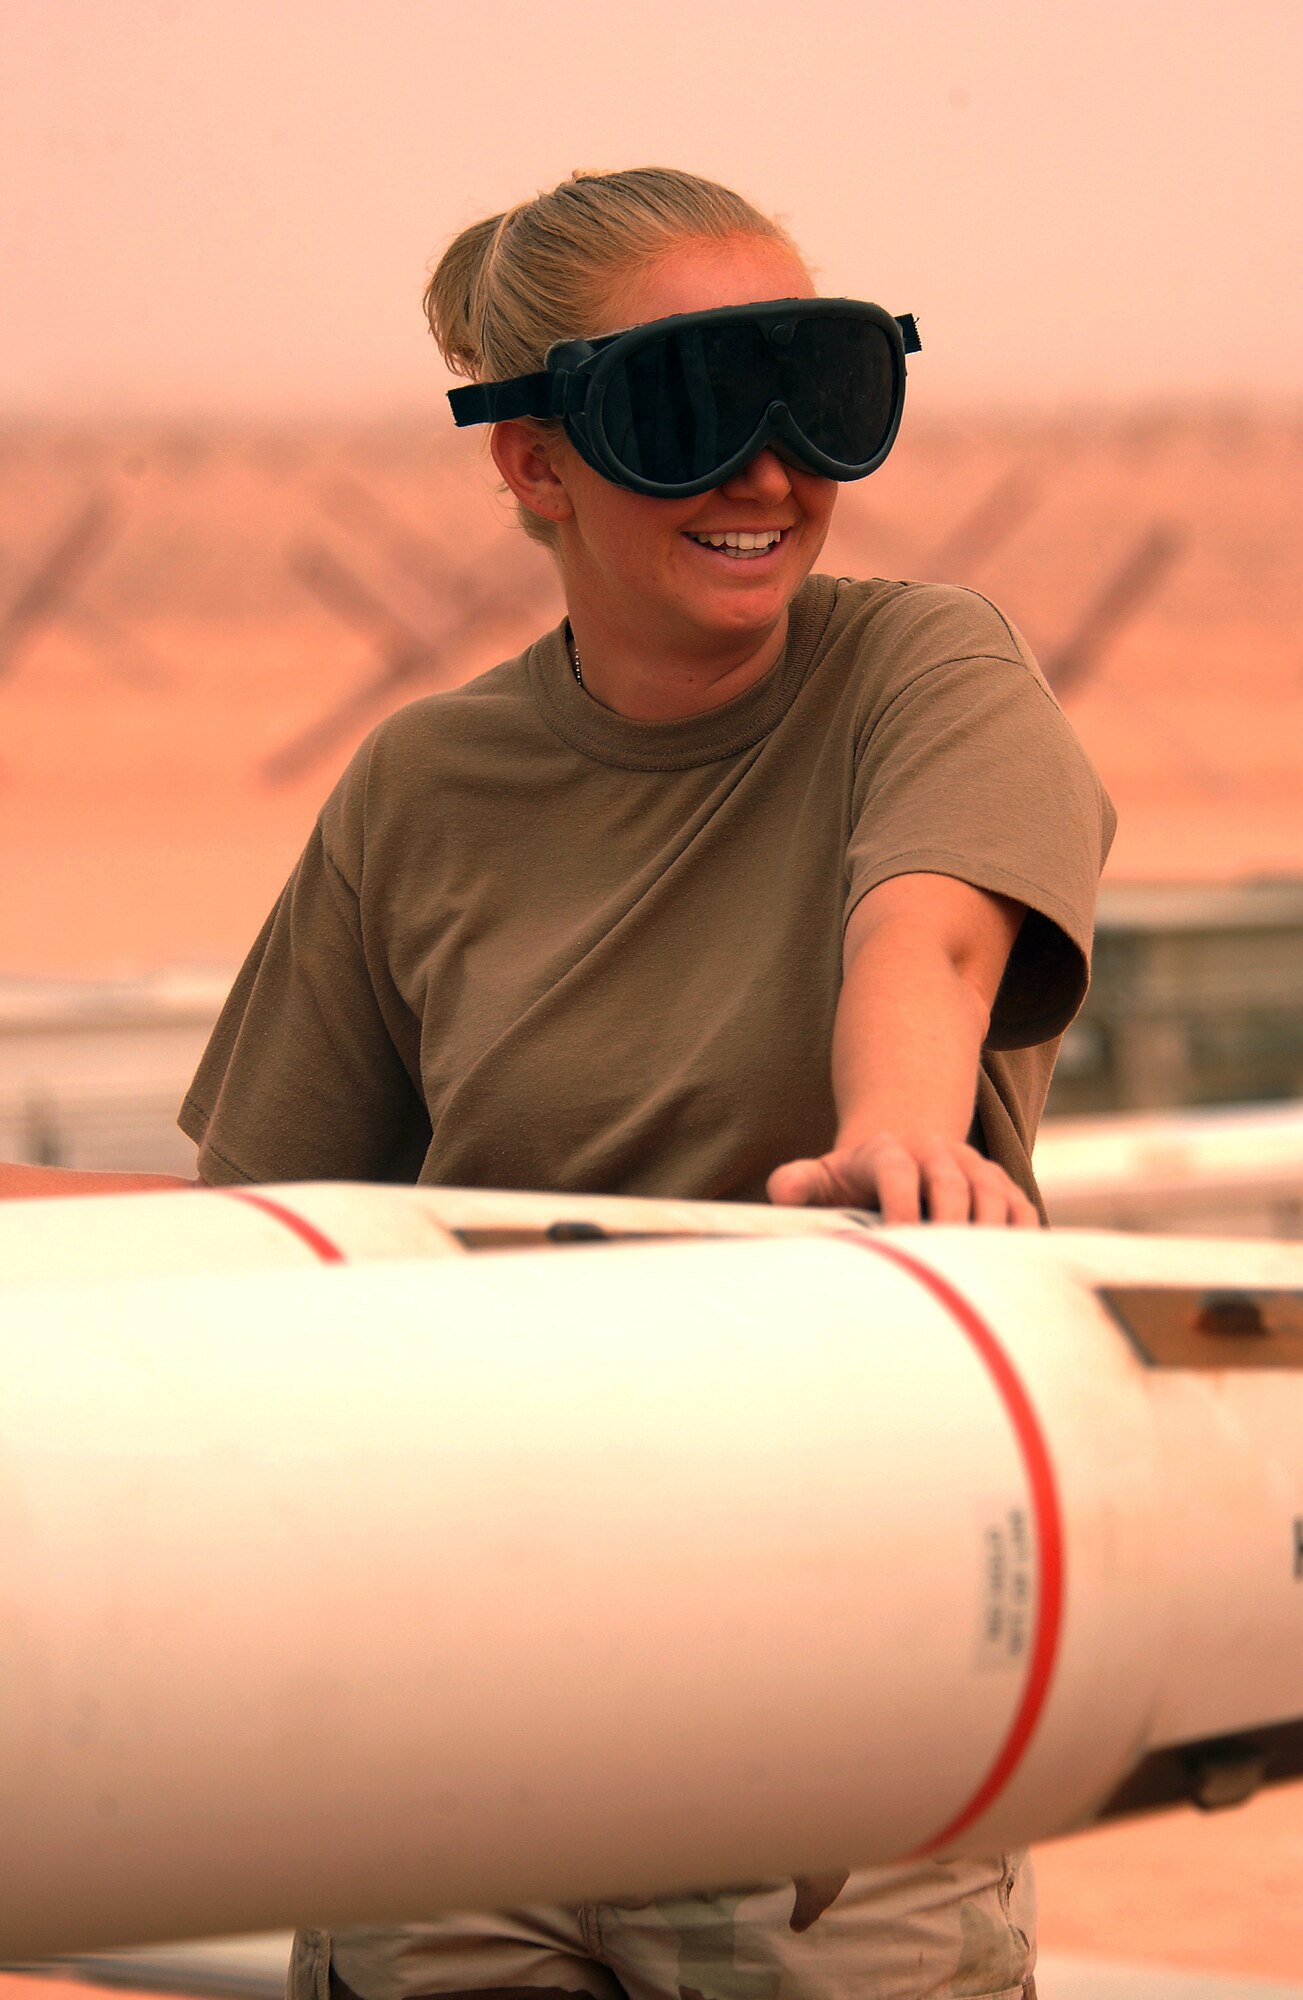 OPERATION IRAQI FREEDOM (AFPN) -- Senior Airman Lisa Jones loads air-to-ground missiles for an F-16 Fighting Falcon on the flightline at a forward-deployed location March 25.  Jones is a precision-guided munitions crew member with the 363rd Expeditionary Equipment Maintenance Squadron.  She is deployed from the 18th Fighter Squadron at Kadena Air Base, Japan.  (U.S. Air Force photo by Staff Sgt. Matthew Hannen) 